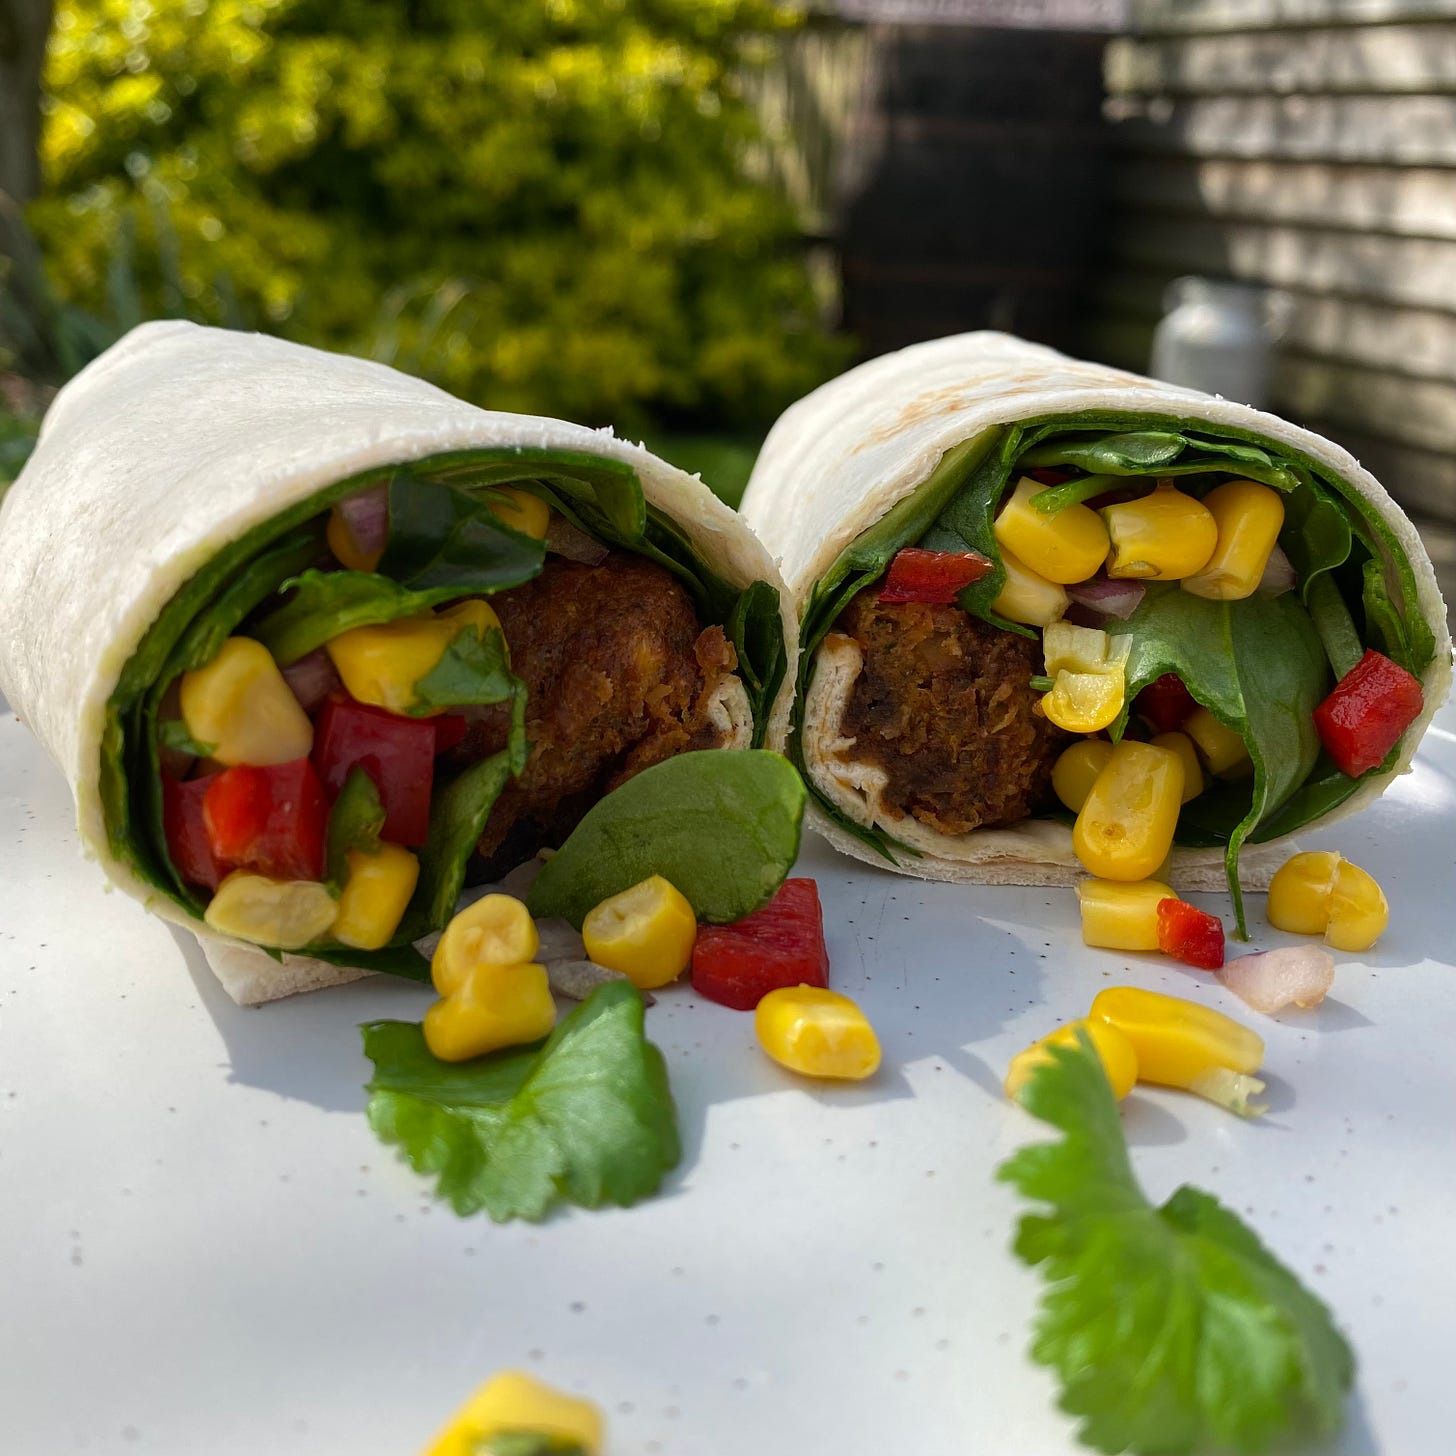 Tortilla wrap sandwich filled with falafel, sweetcorn, spinach and coriander